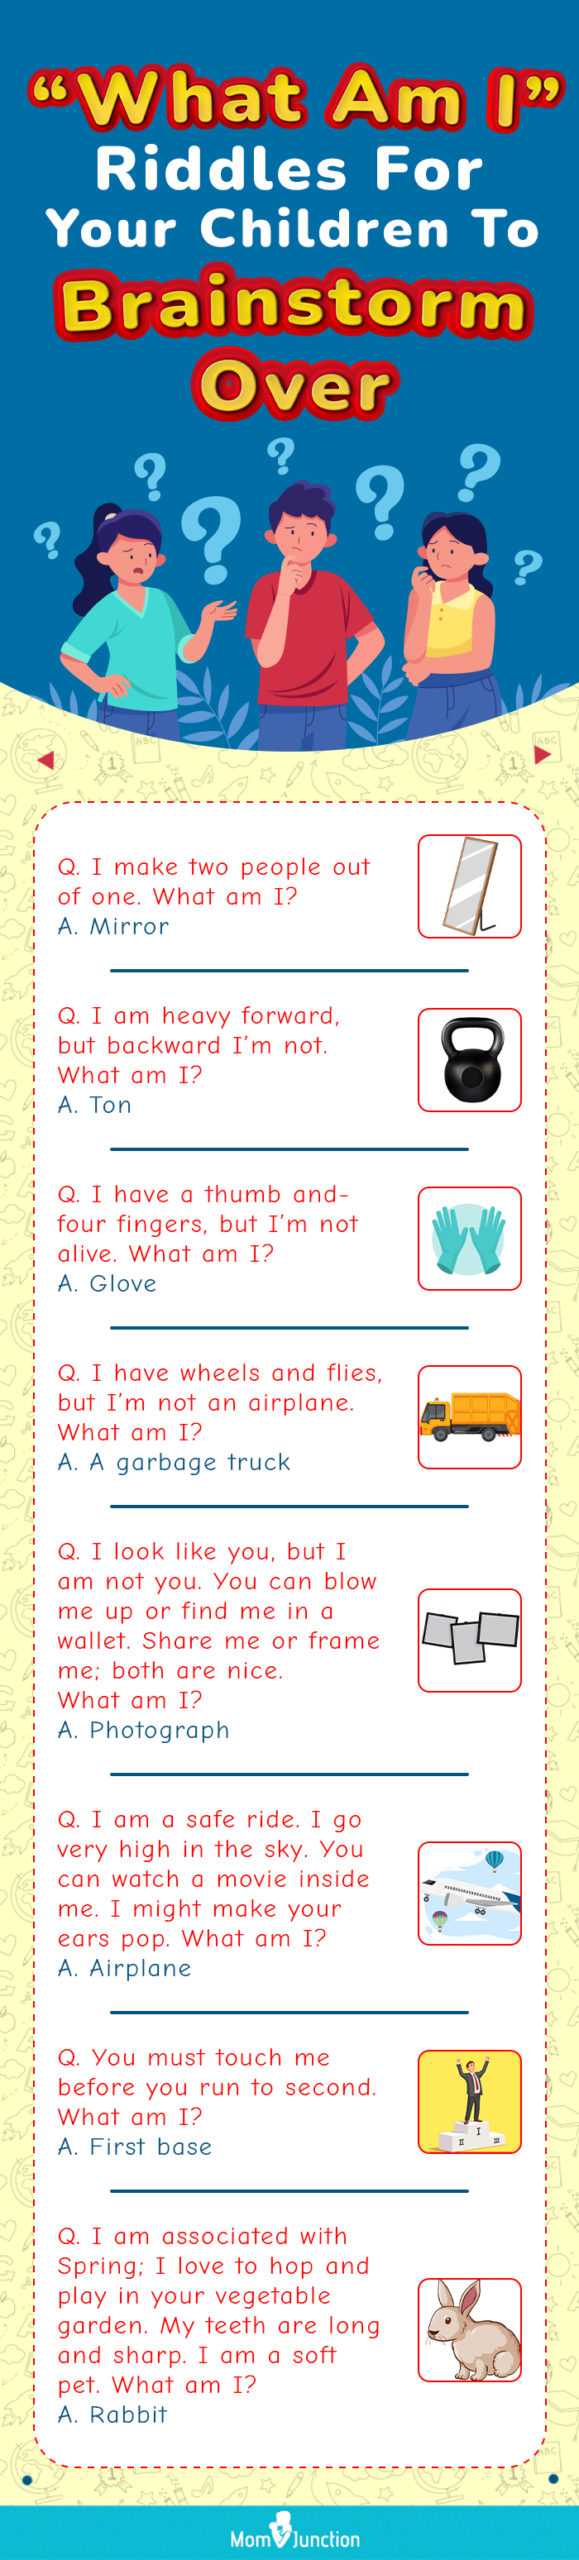 what am i riddles for your children to brainstorm over (infographic)